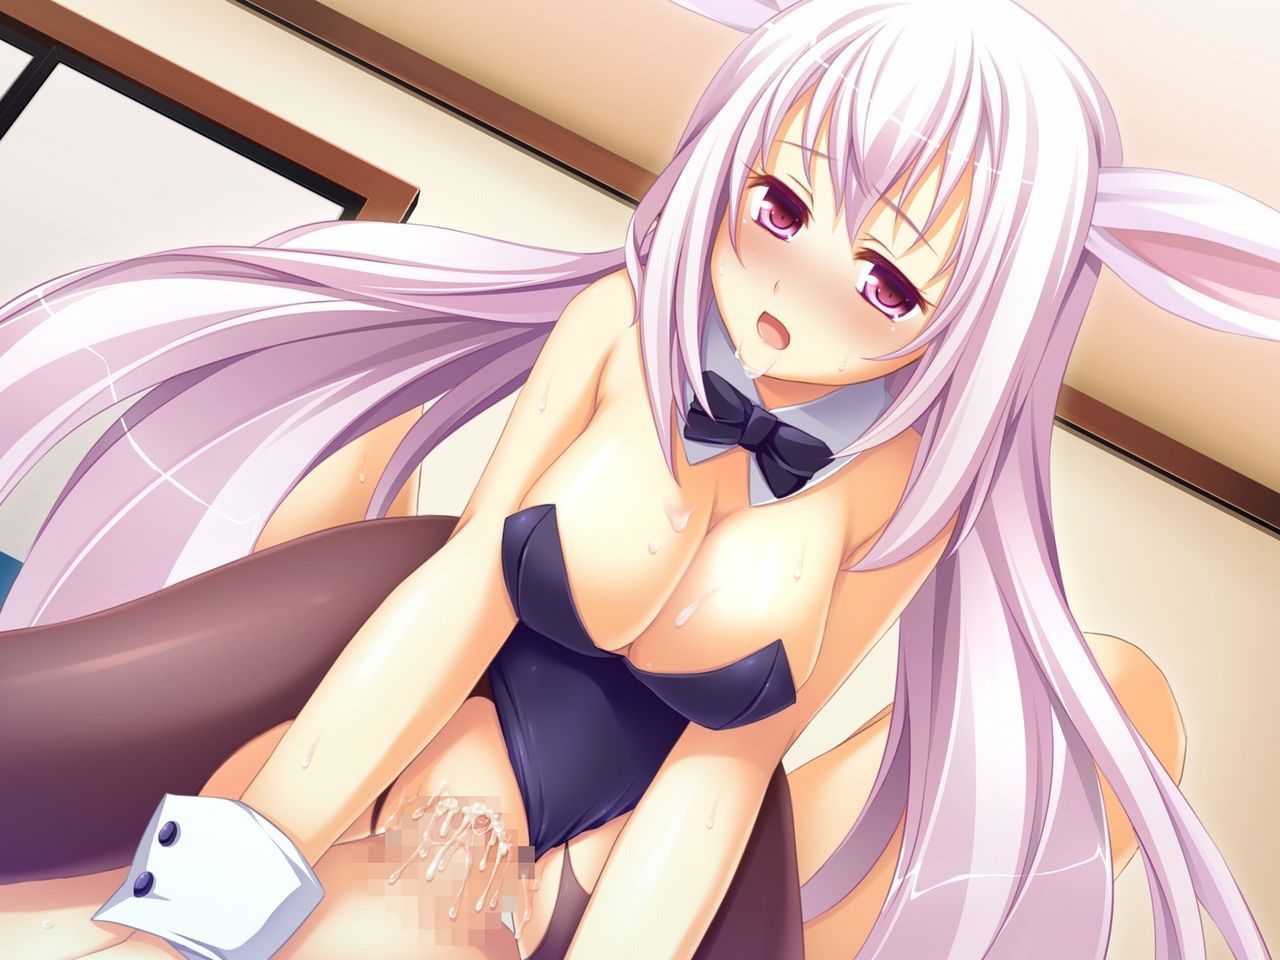 [2nd edition] erotic cute bunny's secondary image # 17 [Bunny Girl] 23